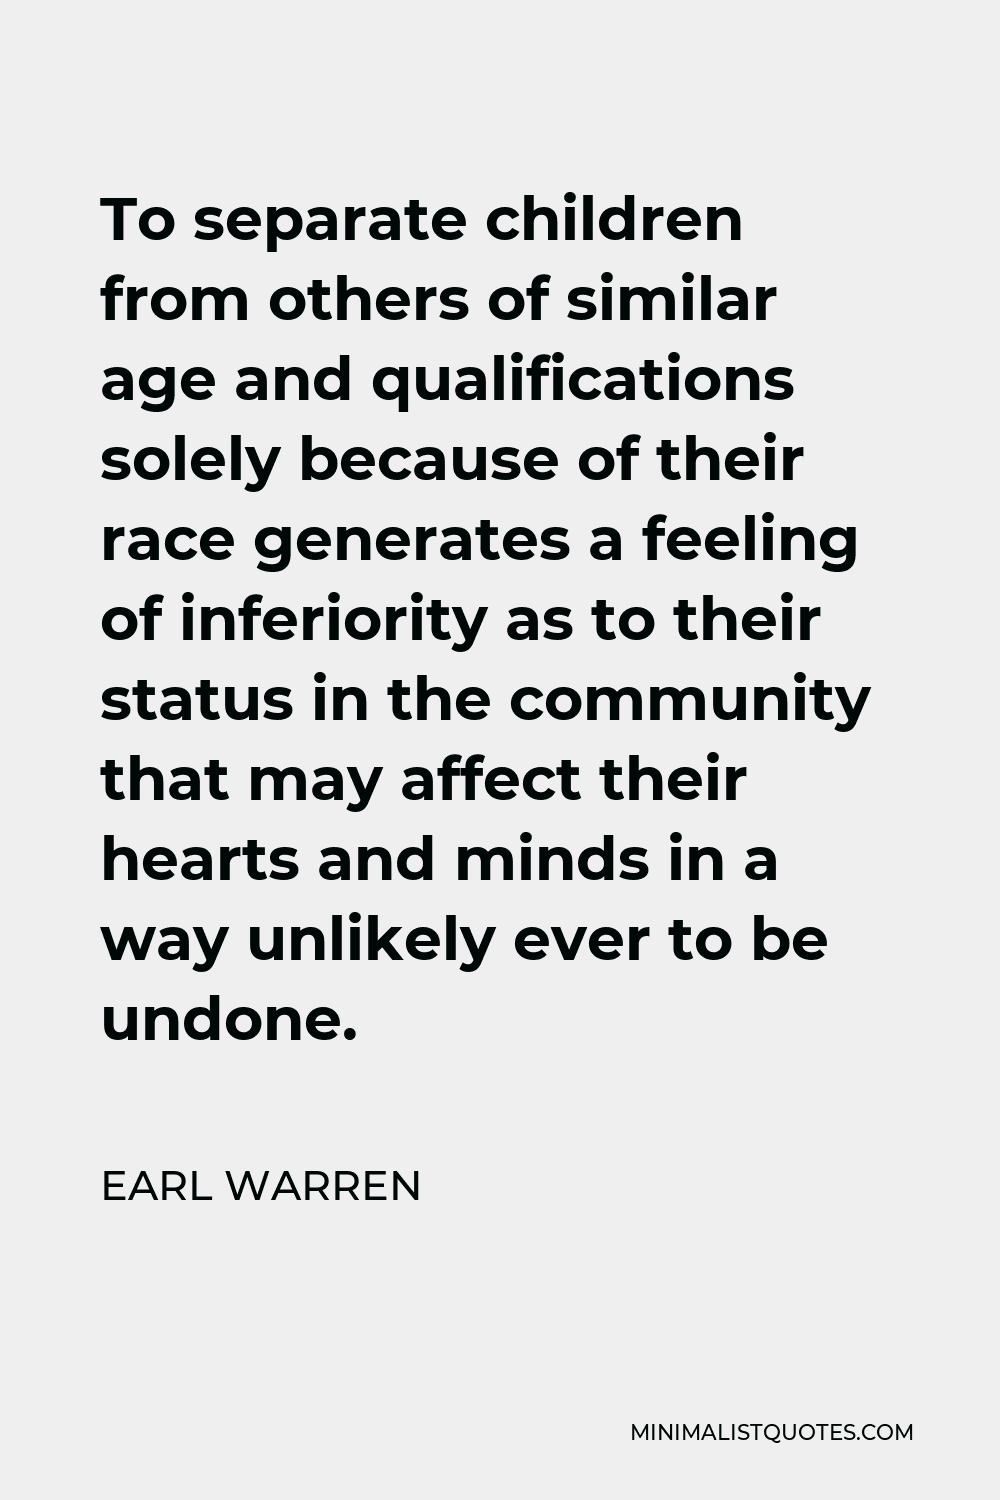 Earl Warren Quote - To separate children from others of similar age and qualifications solely because of their race generates a feeling of inferiority as to their status in the community that may affect their hearts and minds in a way unlikely ever to be undone.